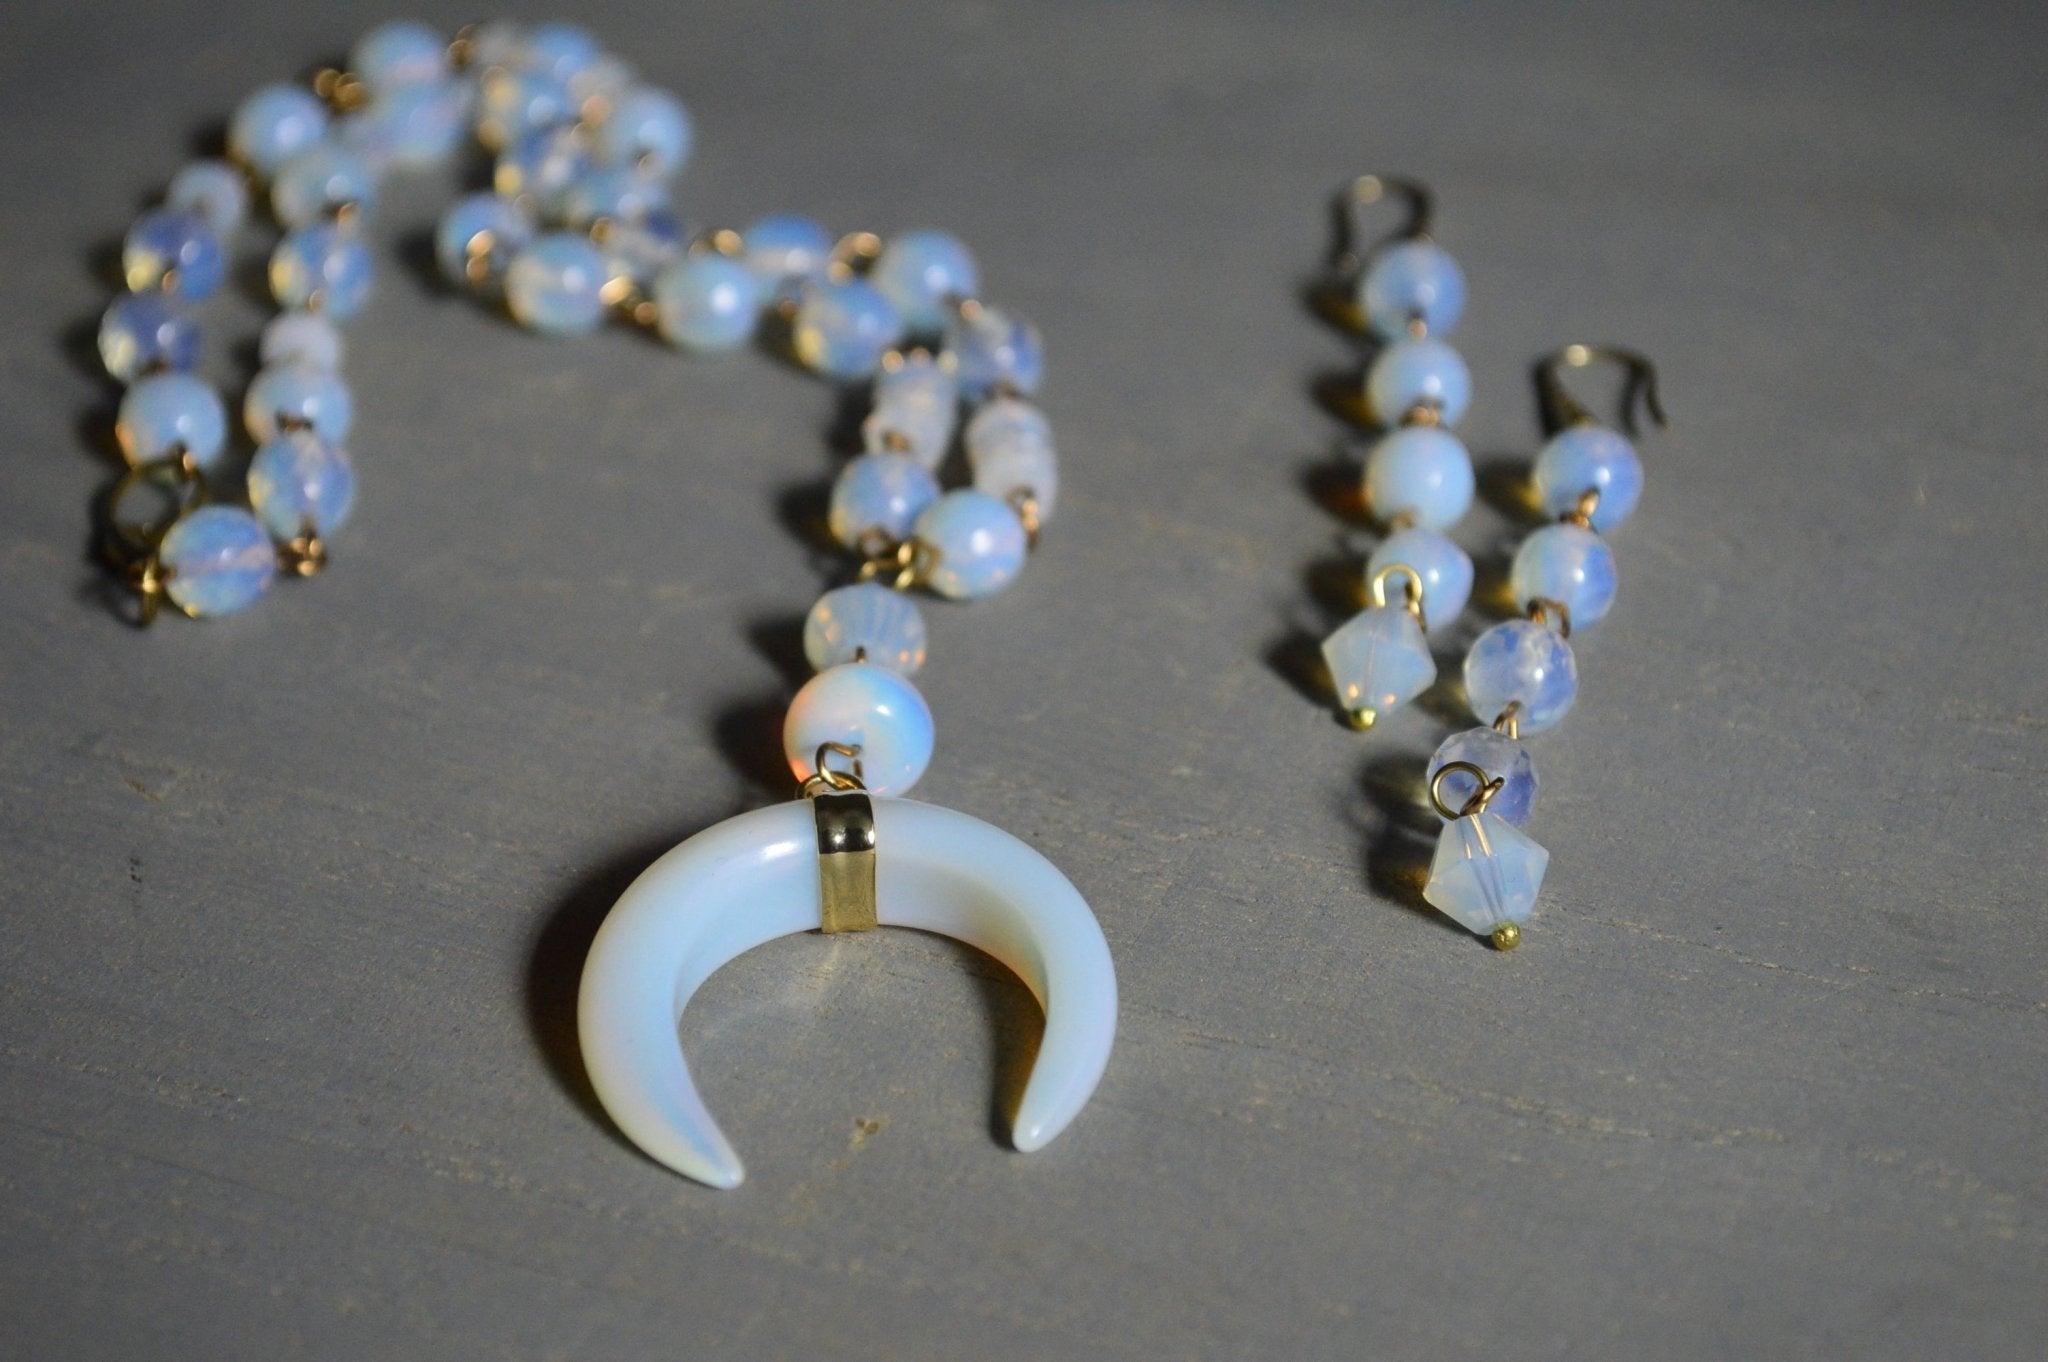 The Moon Rules - Opalite Necklace Set - We Love Brass